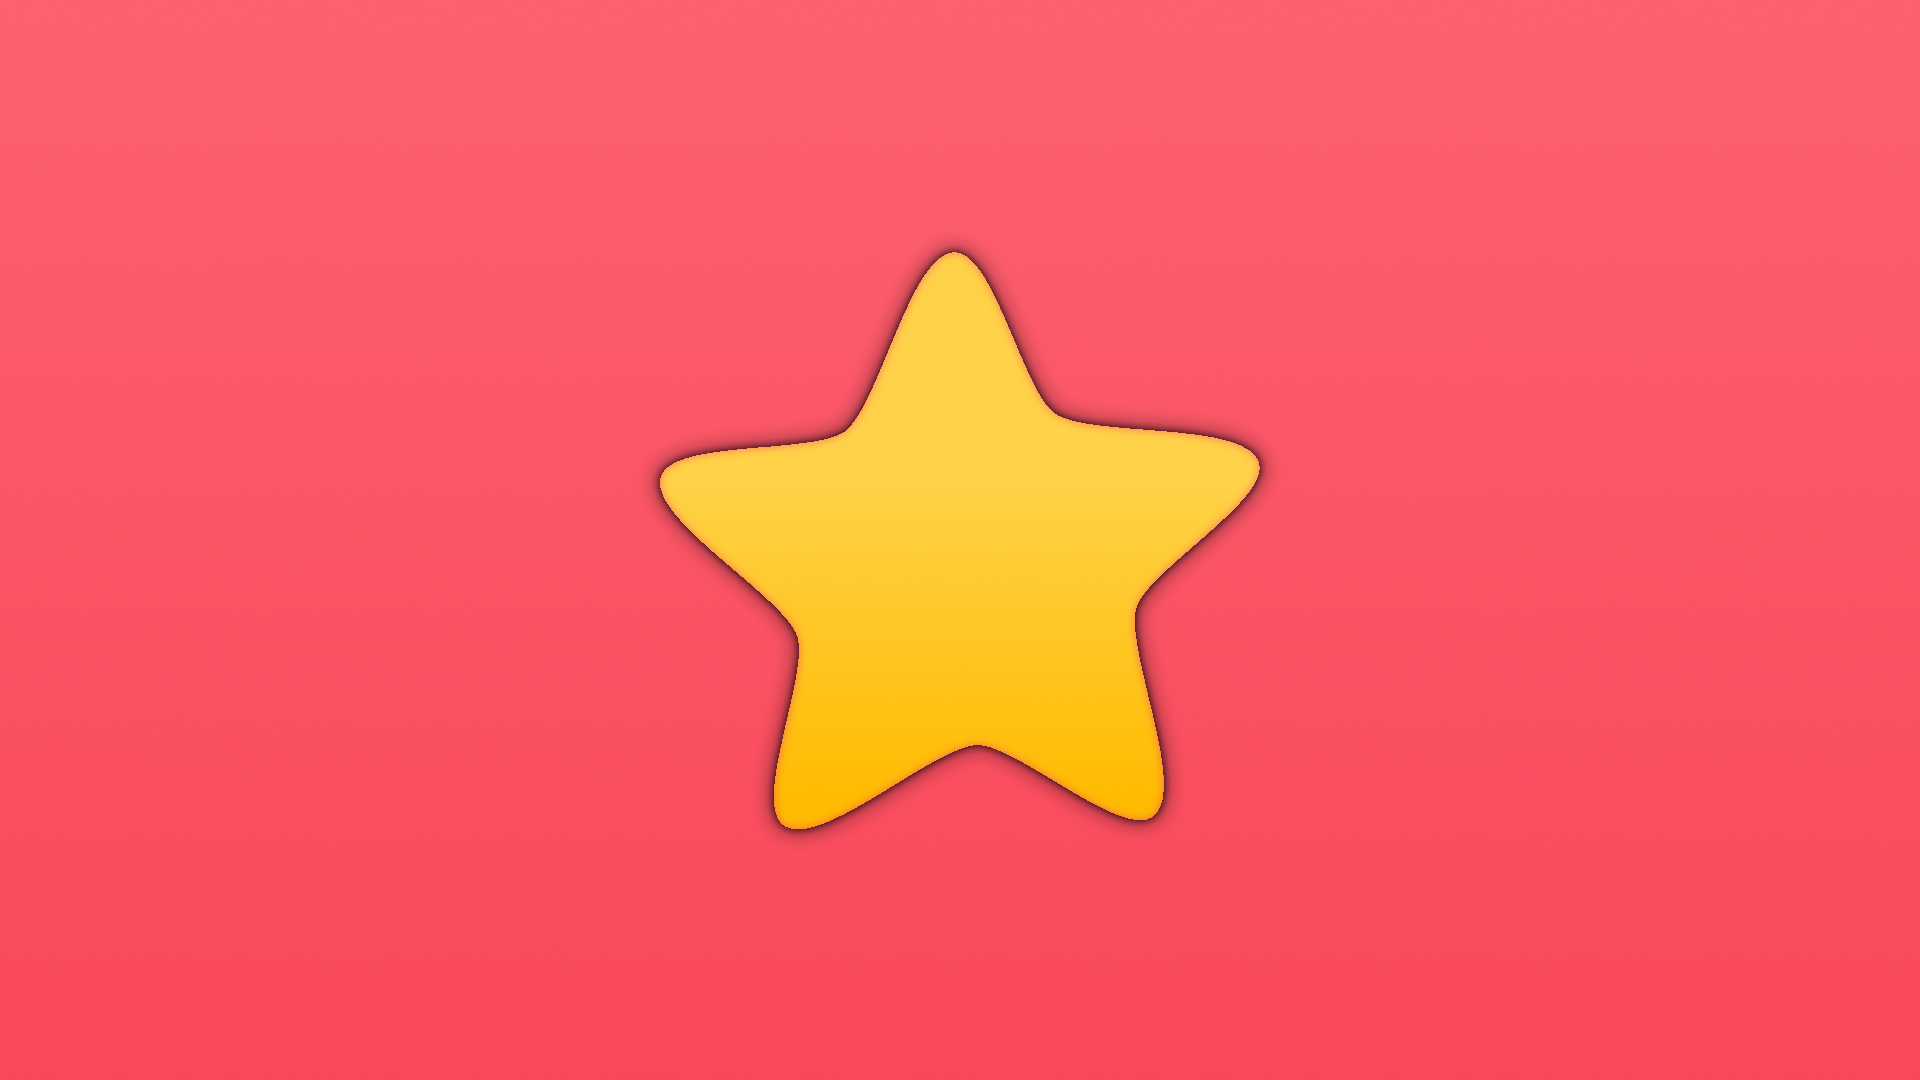 Pink Star PNG HD - 147230